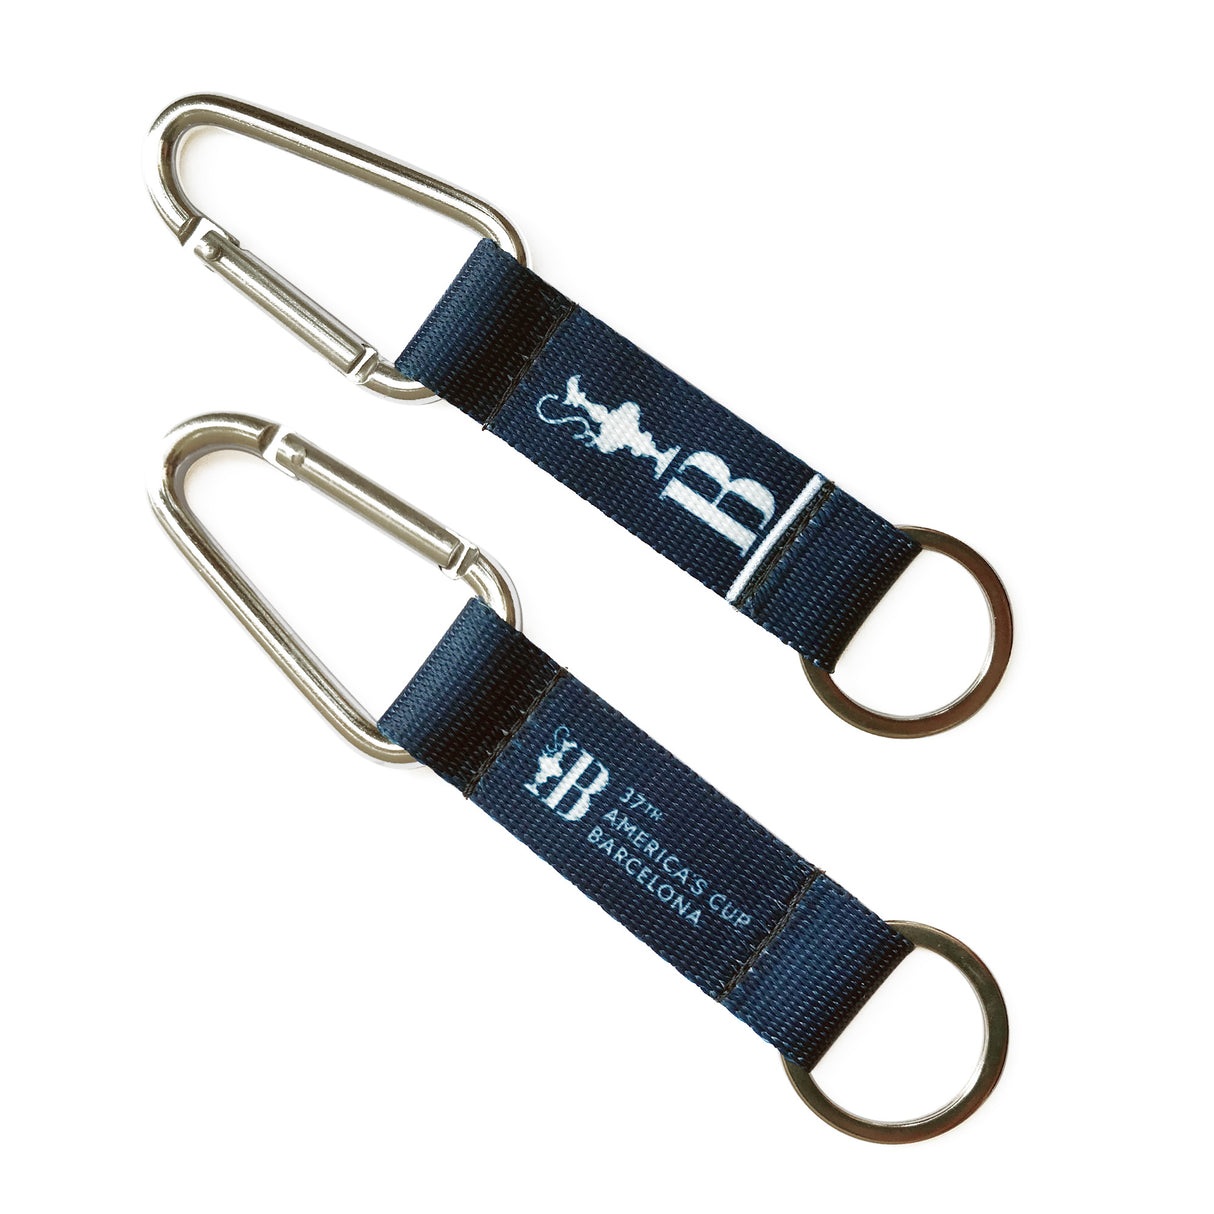 37th America's Cup Carabiner